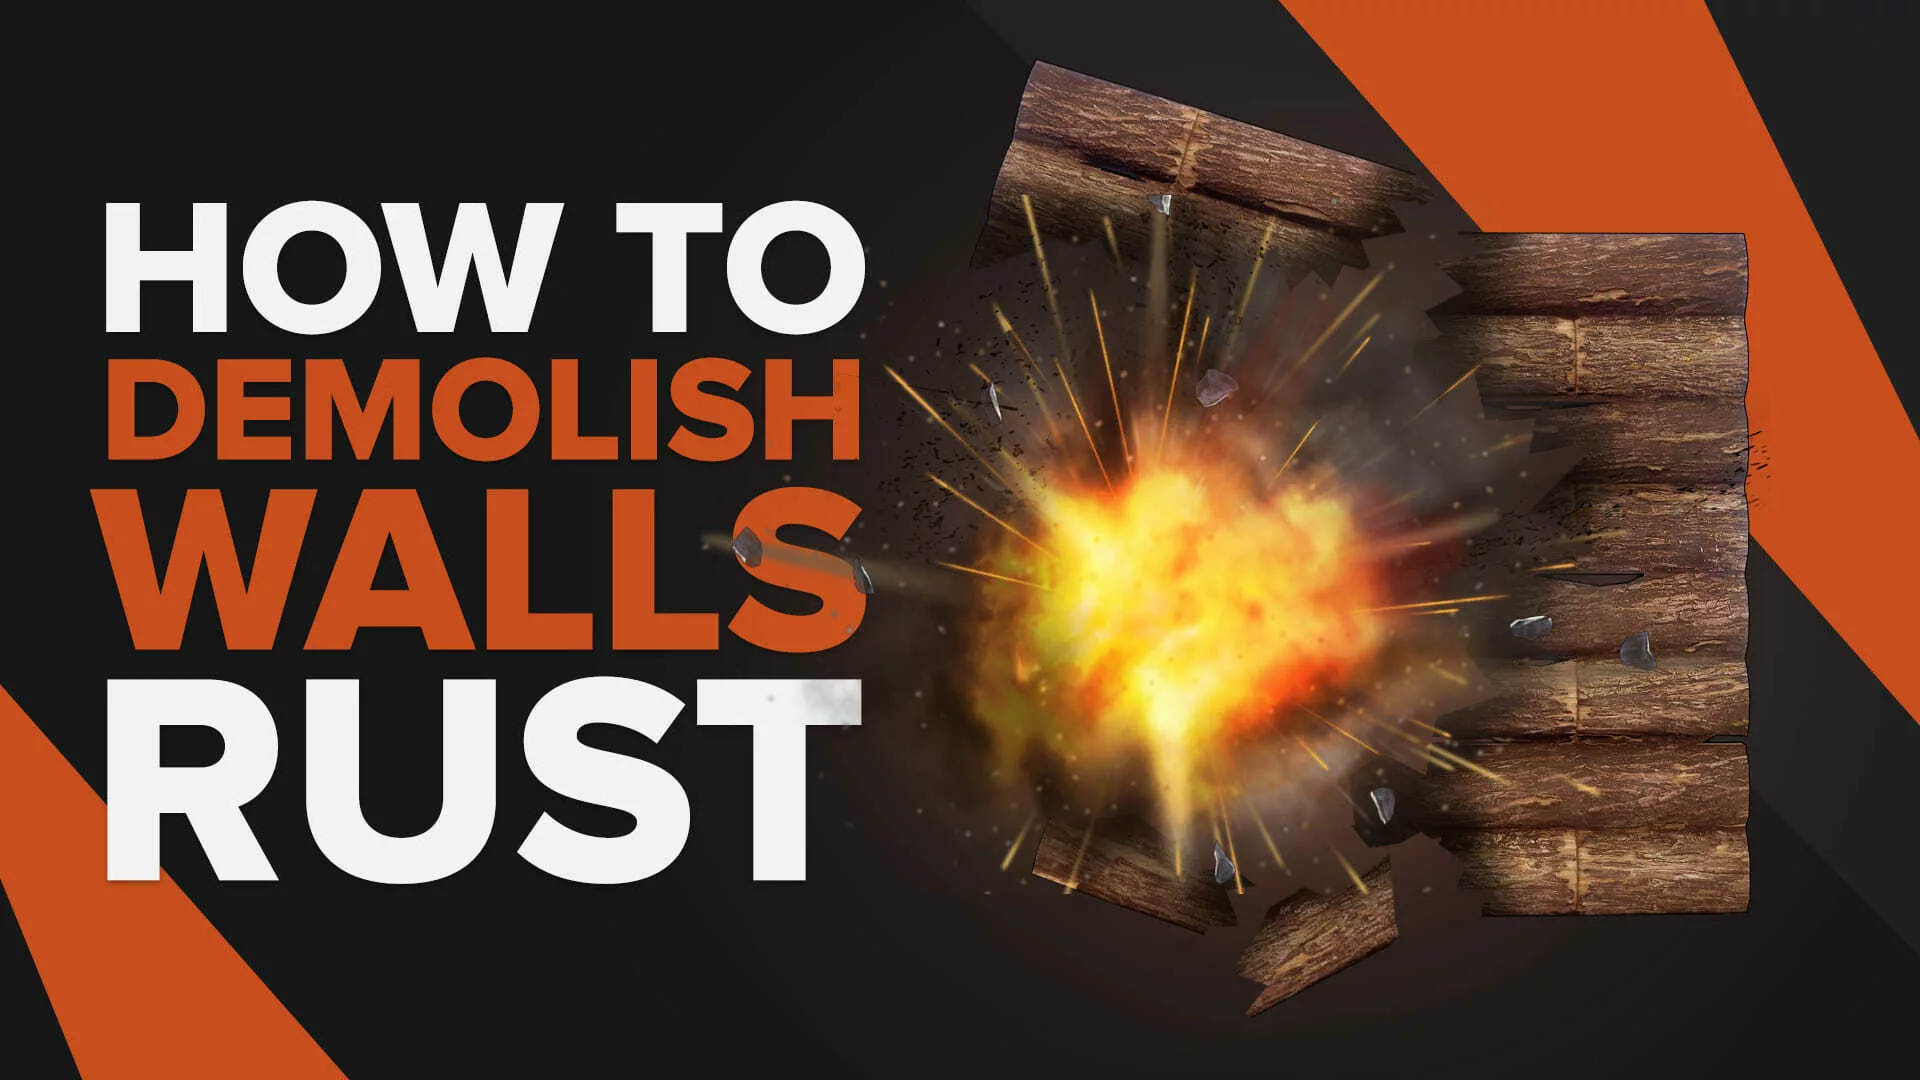 How to Demolish Wall in Rust (Fastest Ways For All Scenarios)